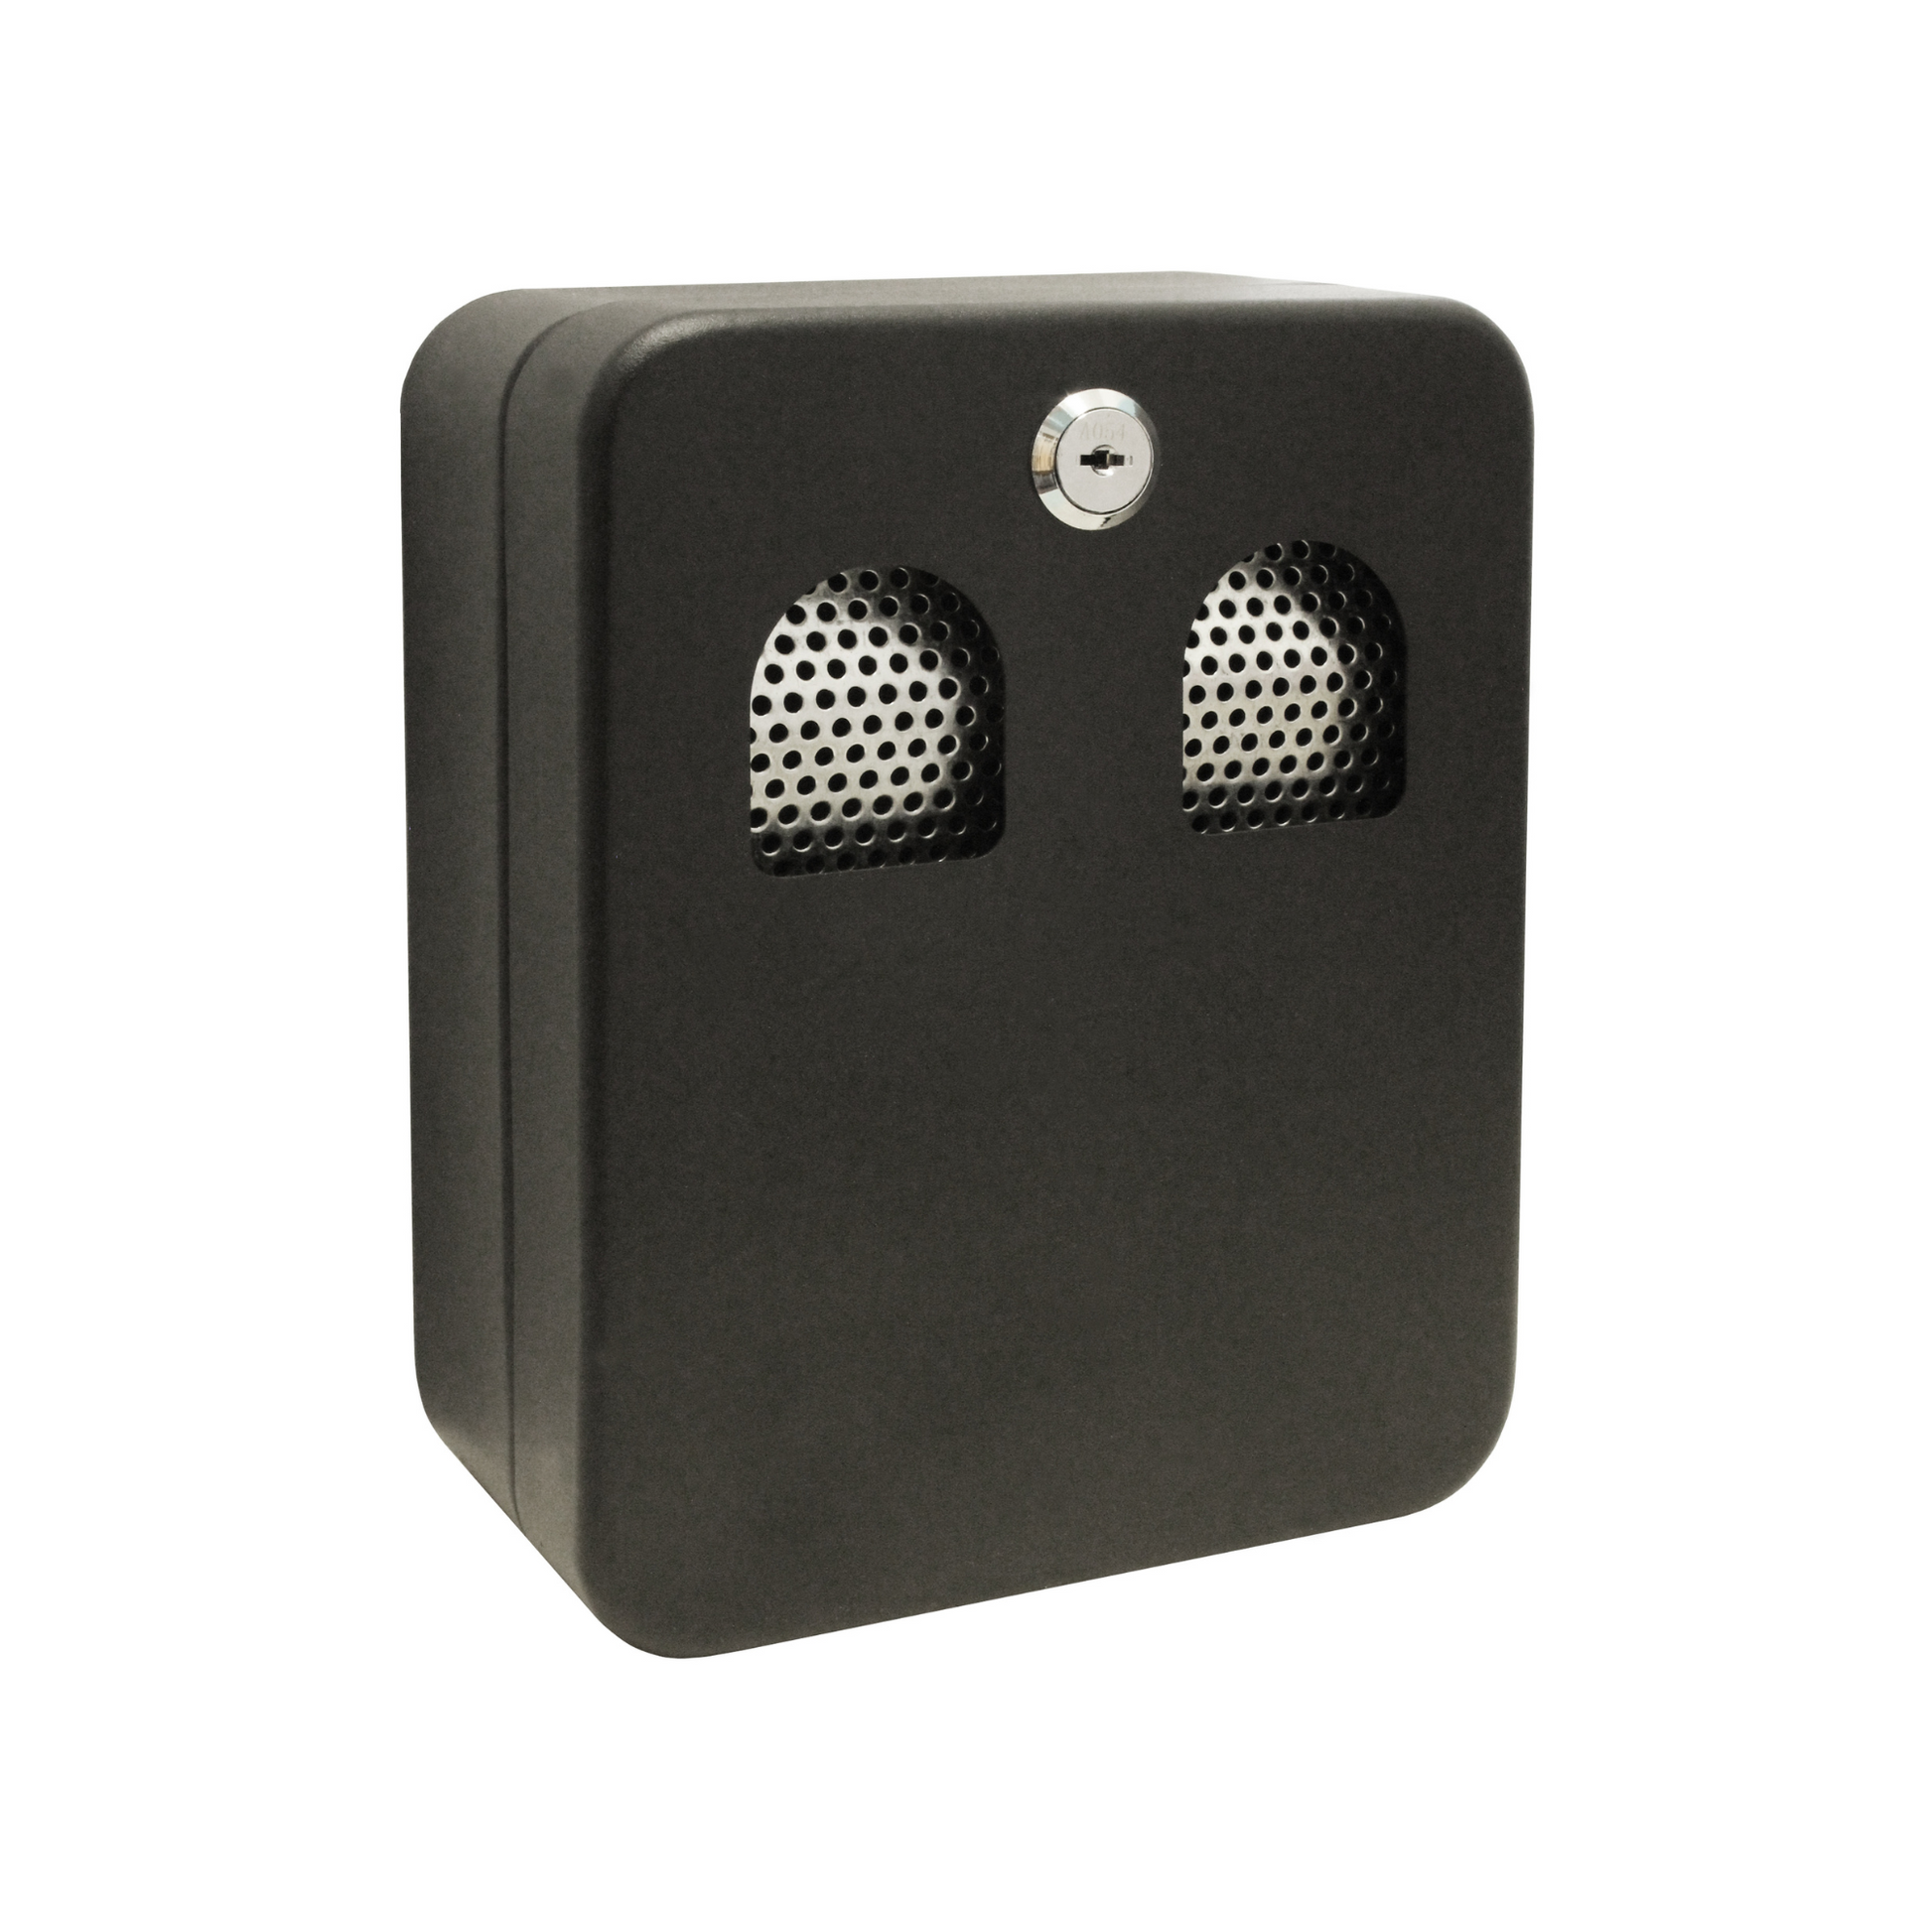 A matte black wall-mounted ash bin with a 1.0L capacity, featuring two perforated metal inserts for extinguishing cigarettes and a lock at the top for secure closure.